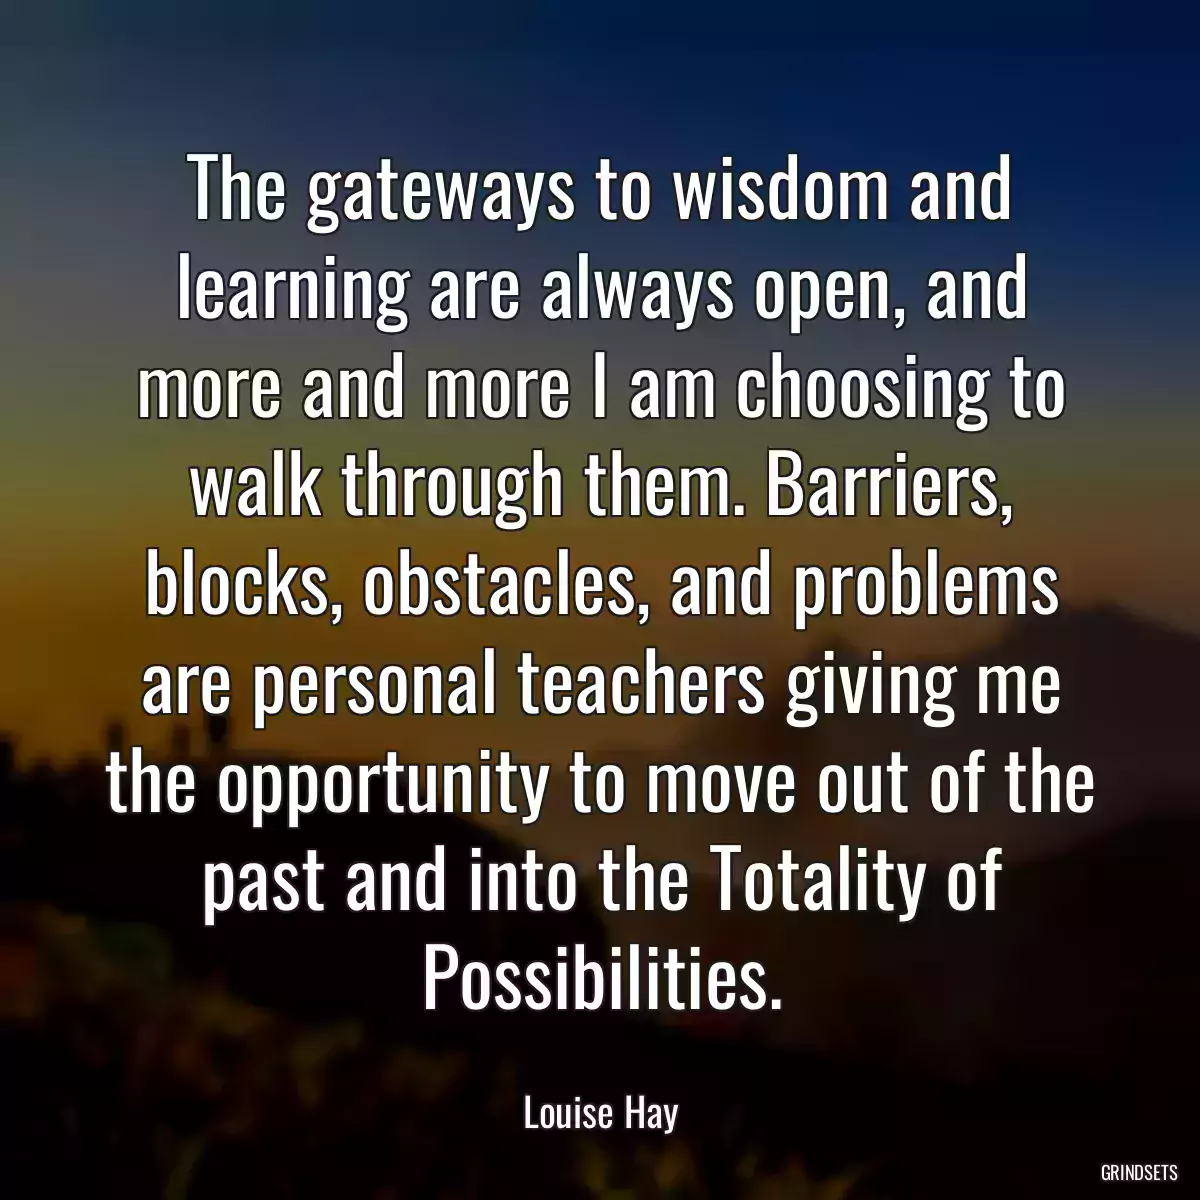 The gateways to wisdom and learning are always open, and more and more I am choosing to walk through them. Barriers, blocks, obstacles, and problems are personal teachers giving me the opportunity to move out of the past and into the Totality of Possibilities.